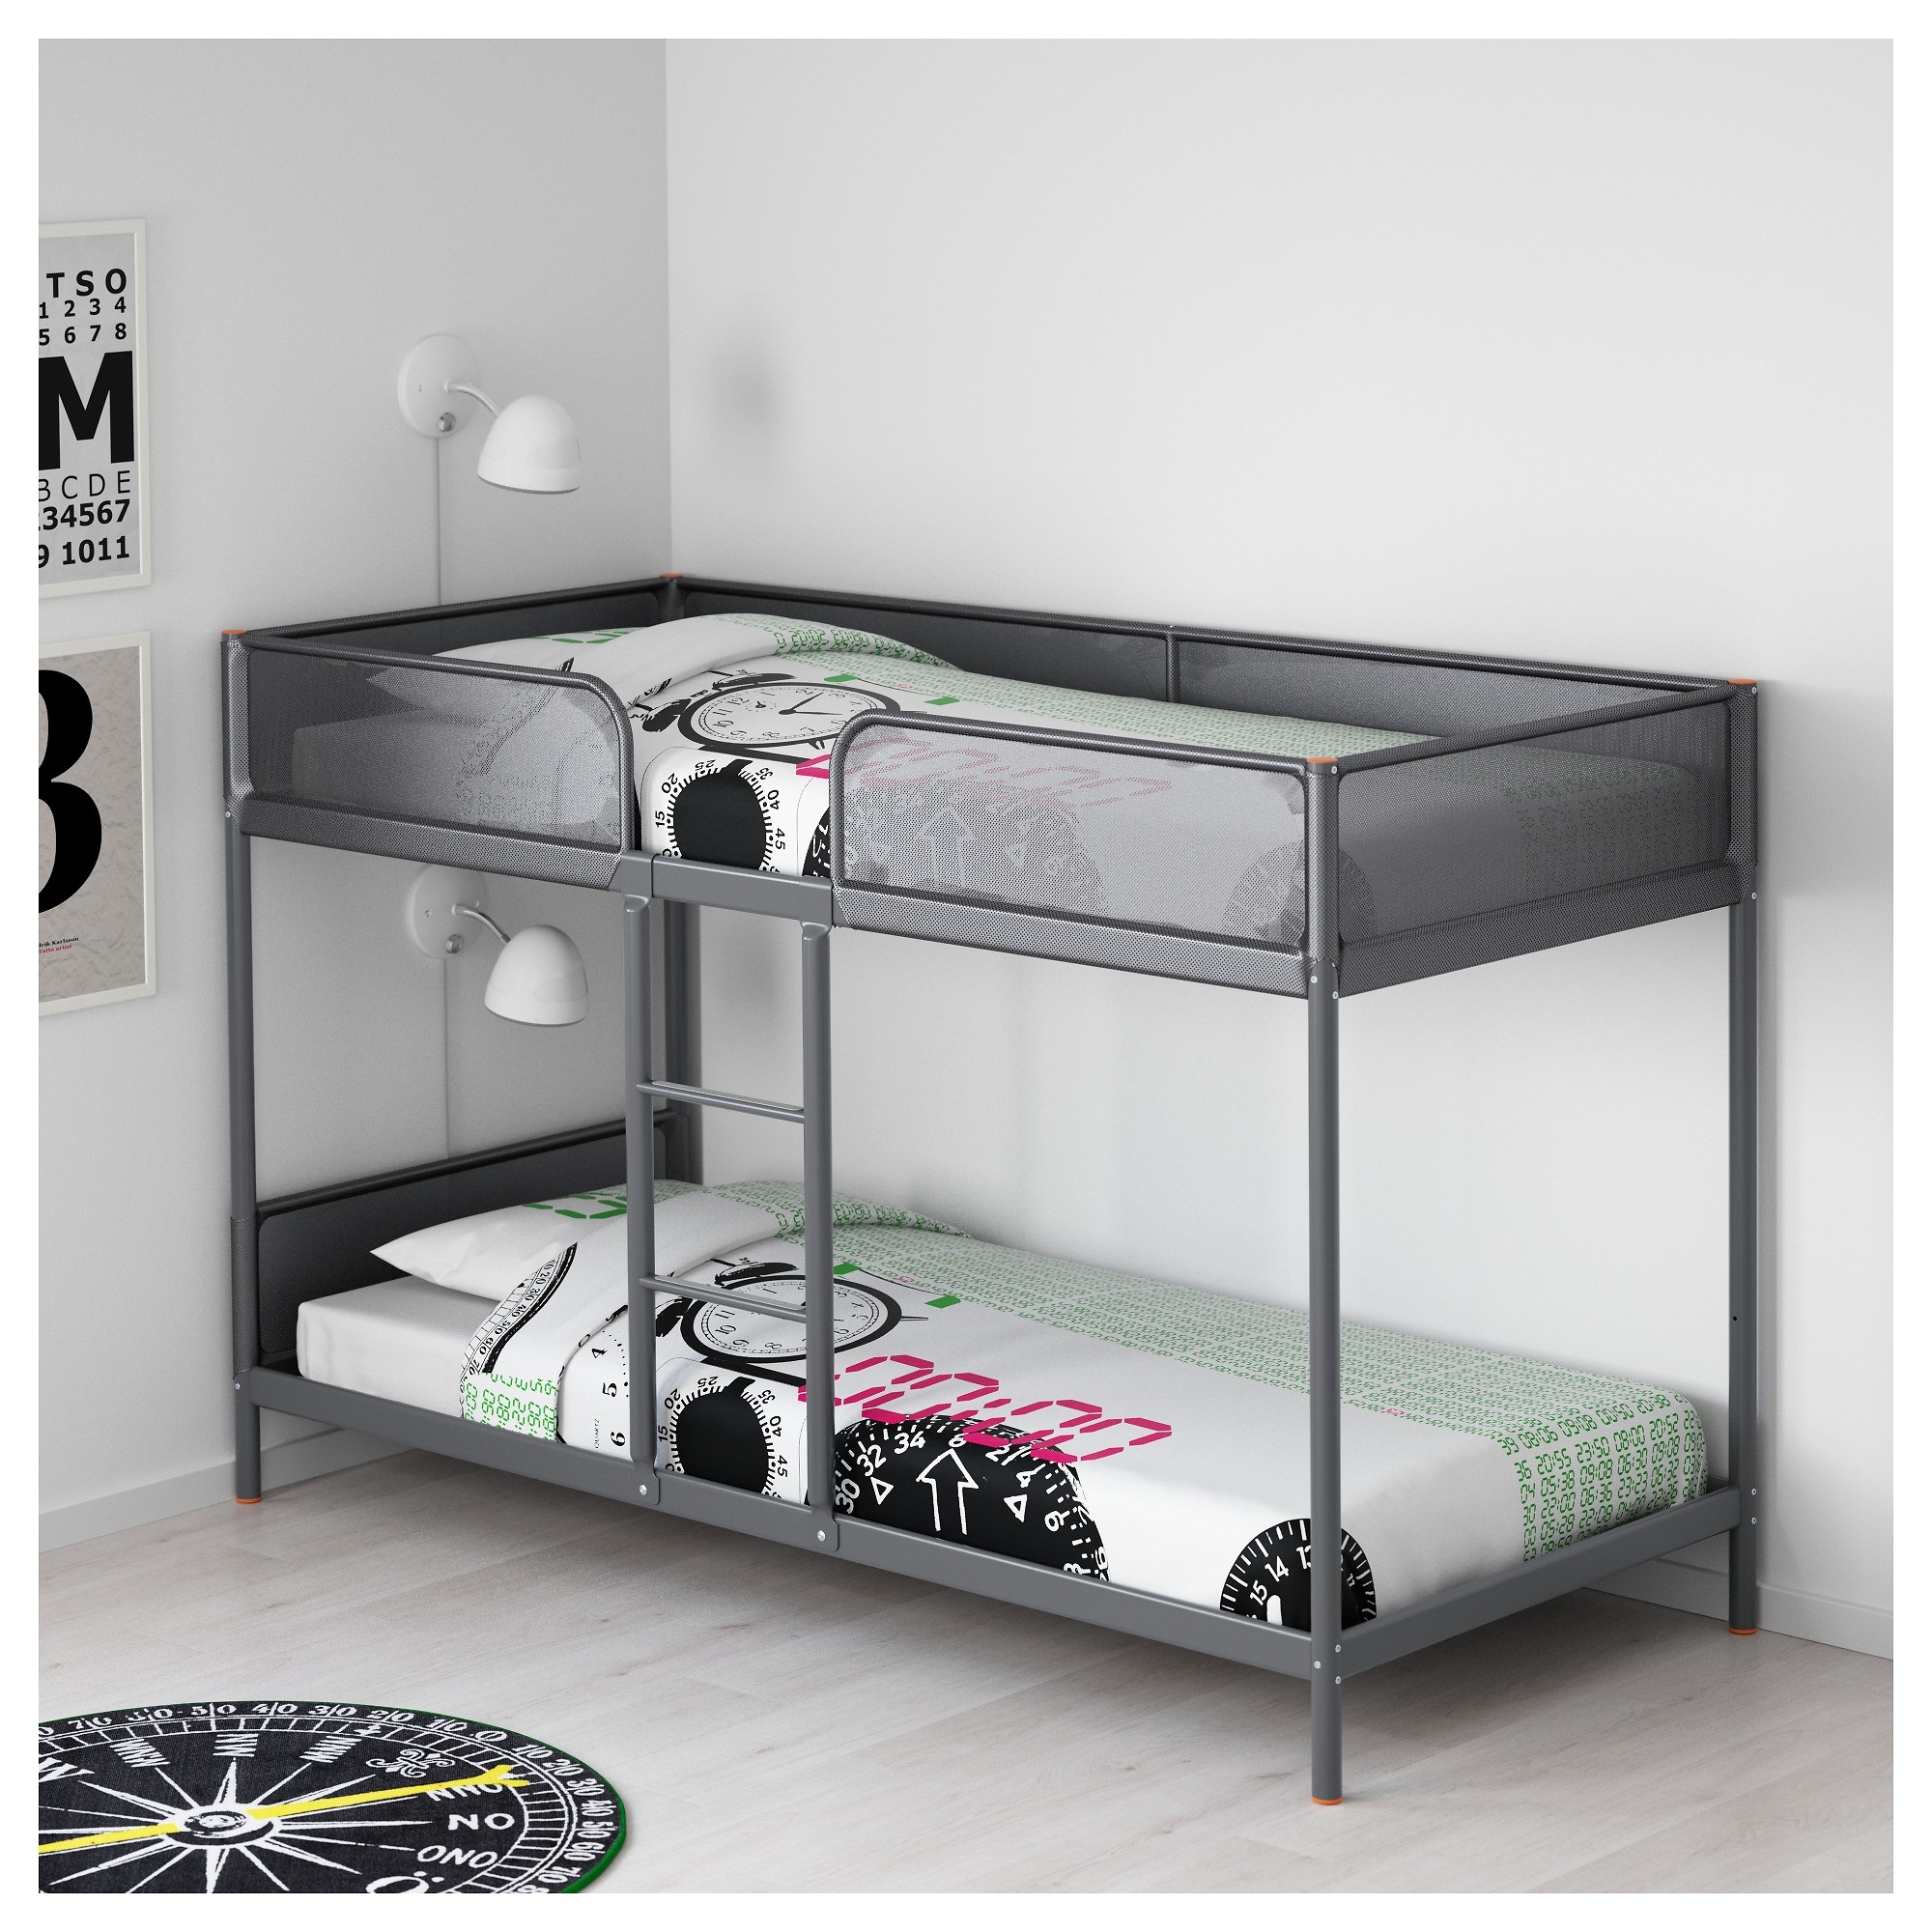 Twin Over Double Bunk Bed Ikea Er, Double Twin Bunk Bed Ikea